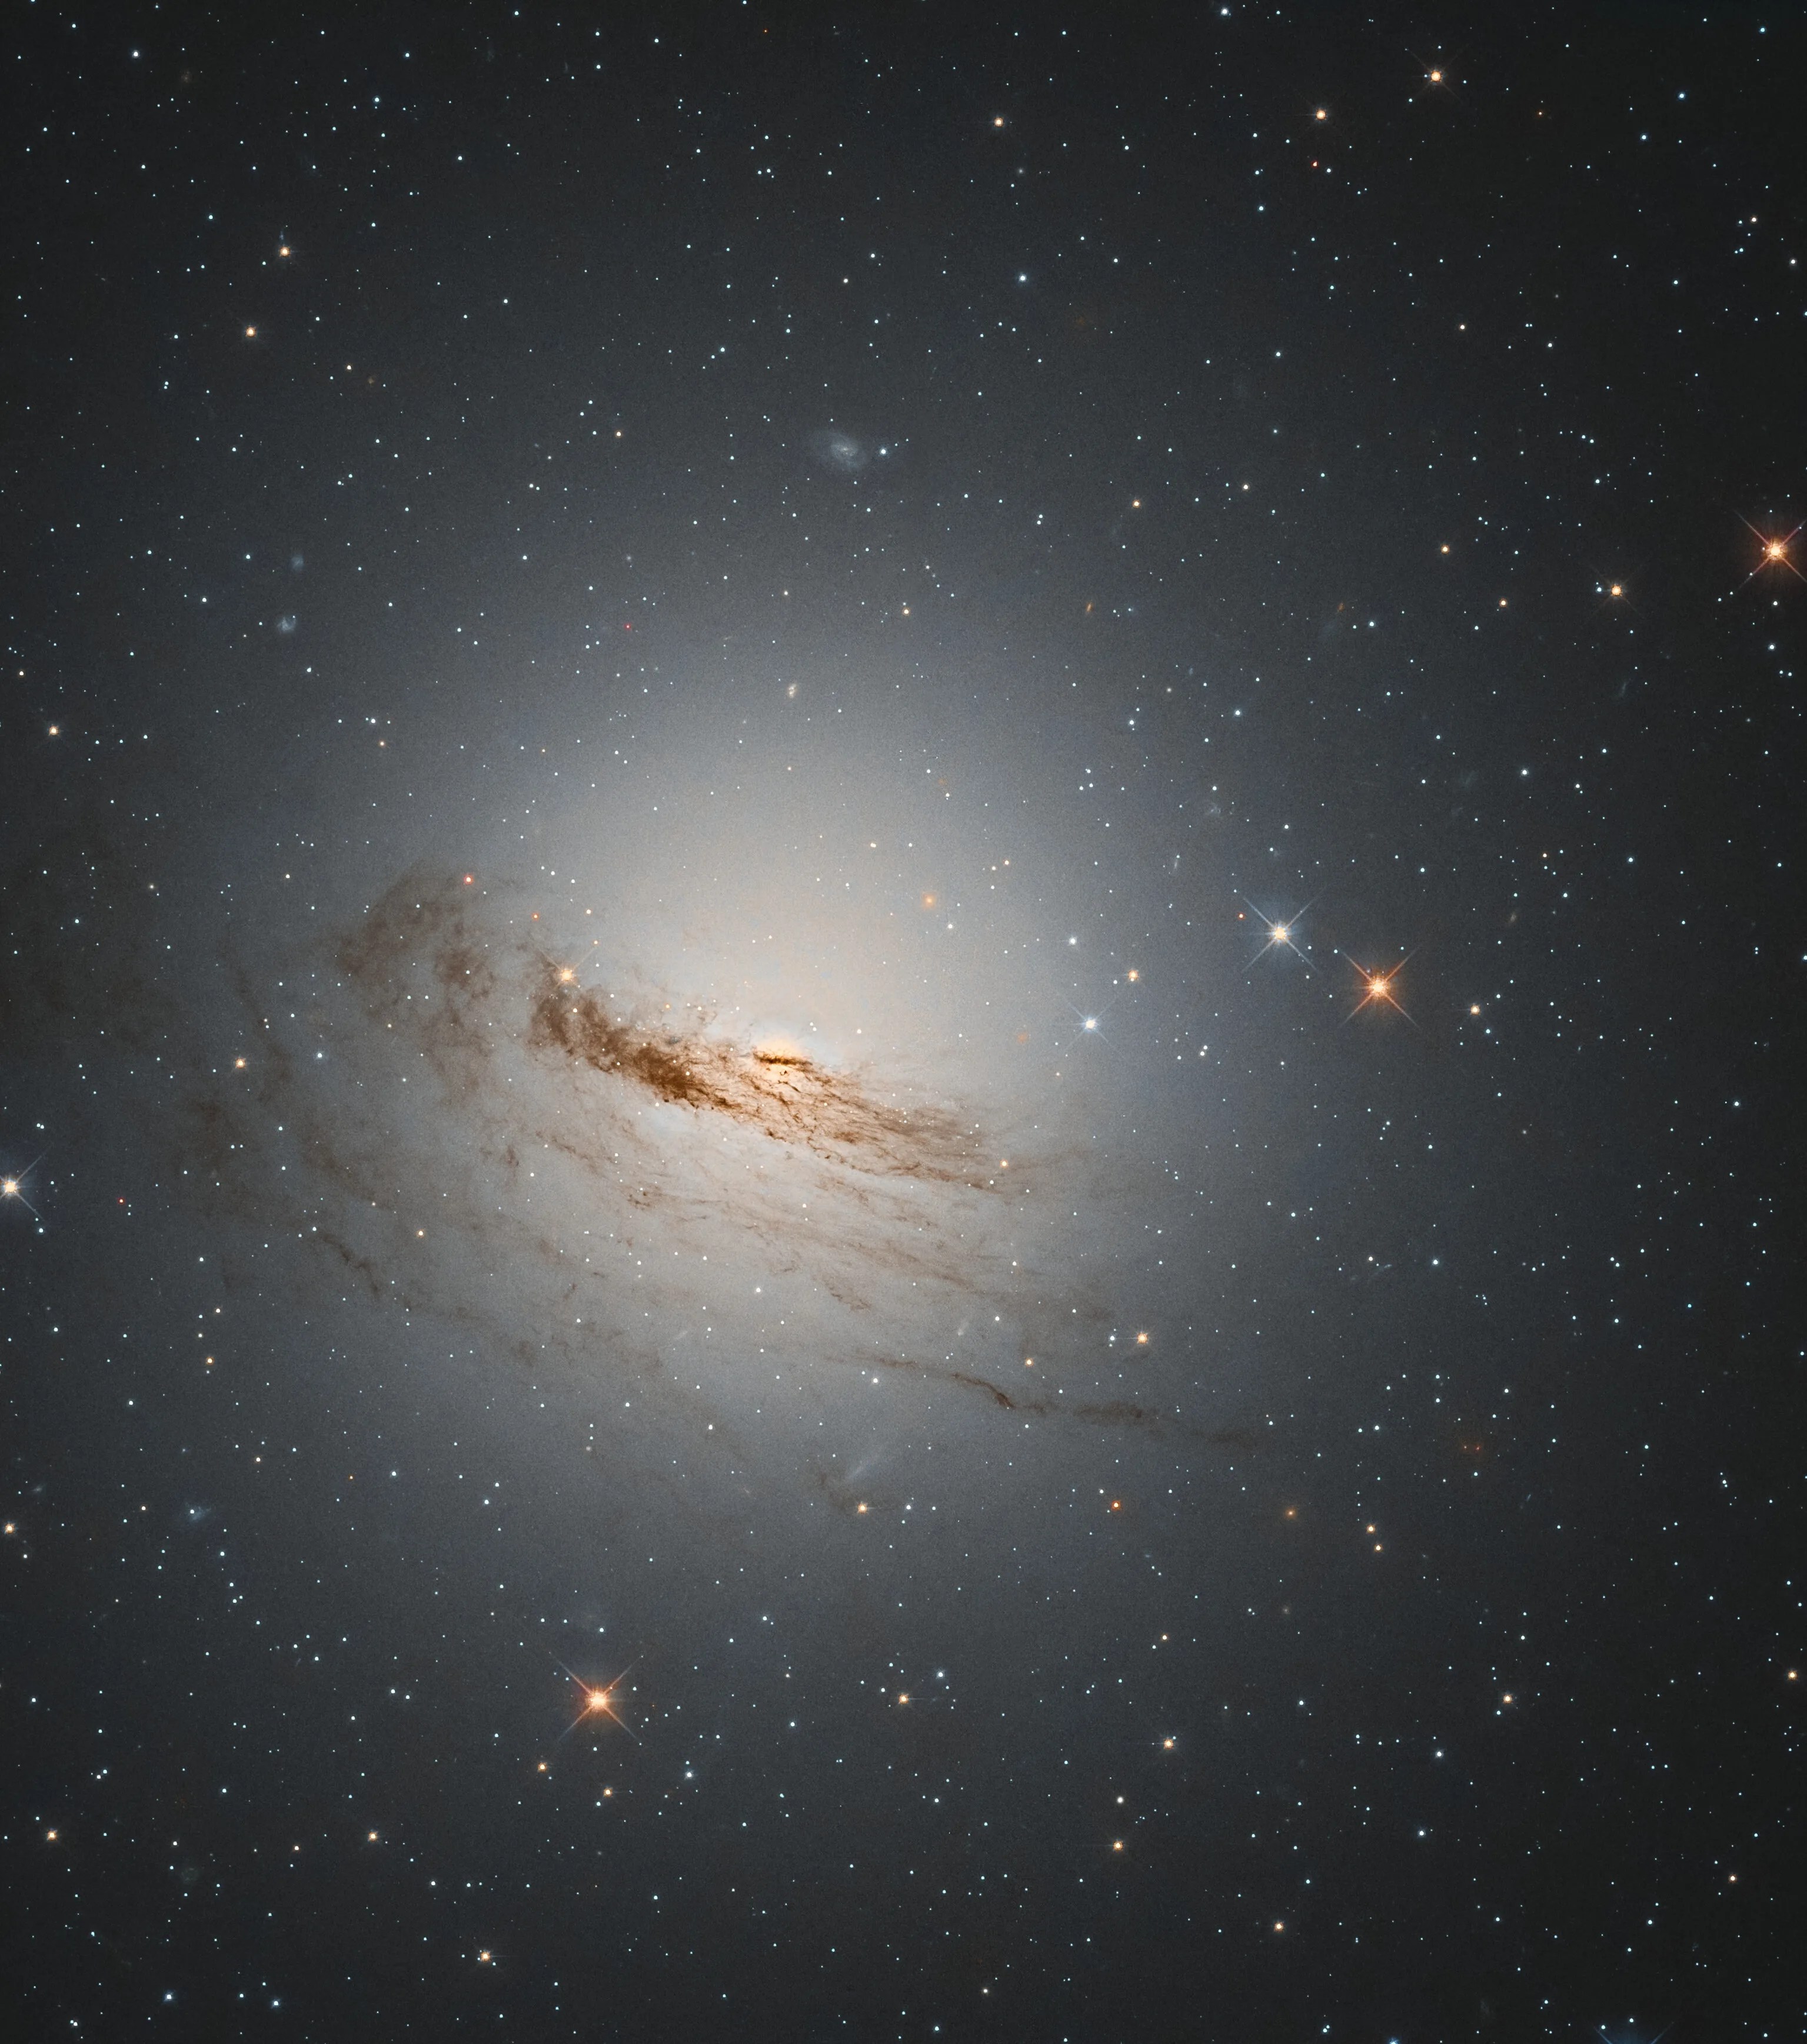 Known as ngc 1947, this galaxy was discovered almost 200 years ago by james dunlop, a scottish-born astronomer.